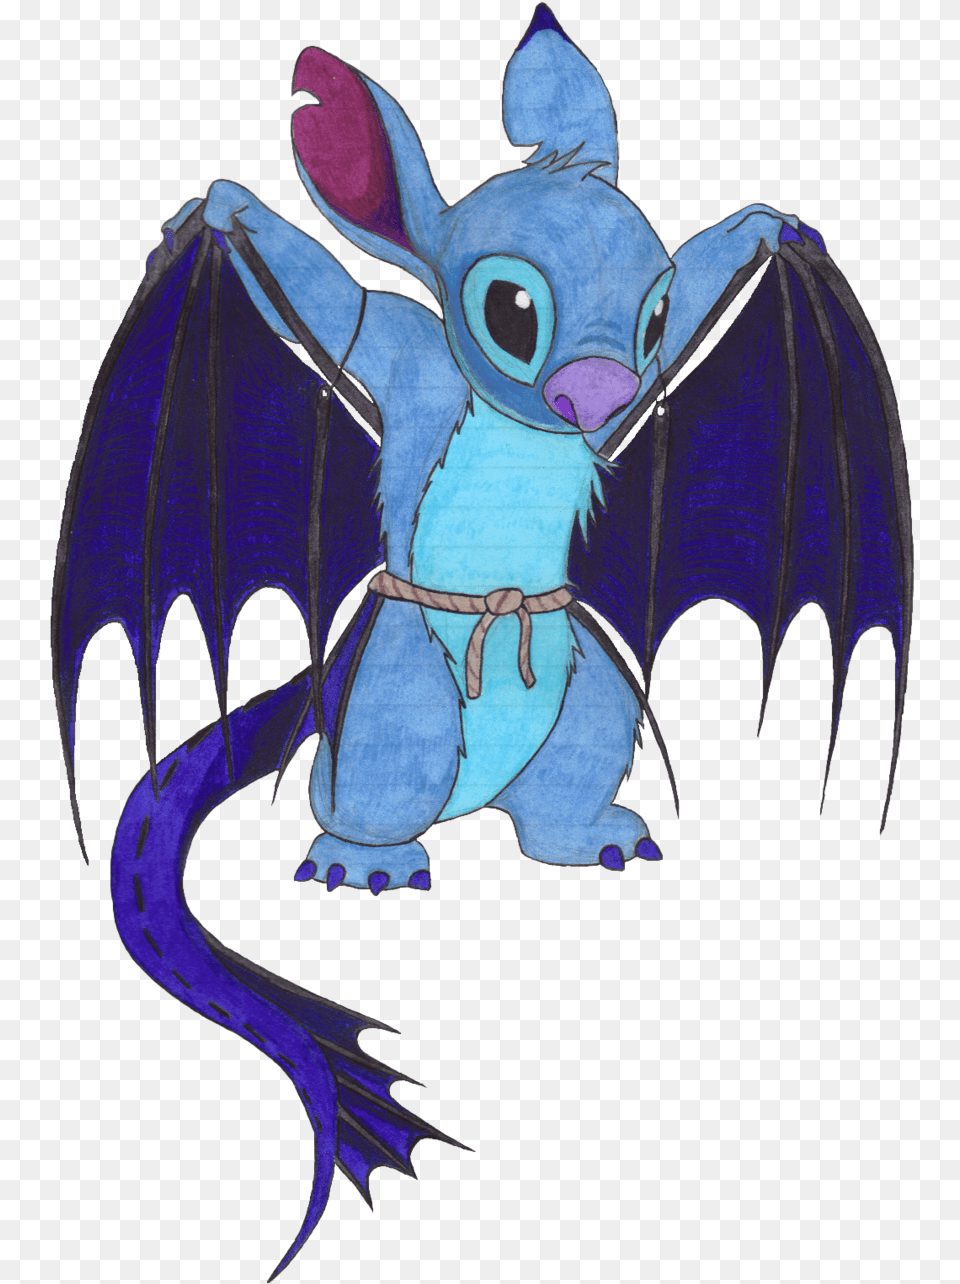 Drawing Toothless Cute Frames Illustrations Images Easy Toothless Dragon Drawing, Accessories, Art, Ornament Free Png